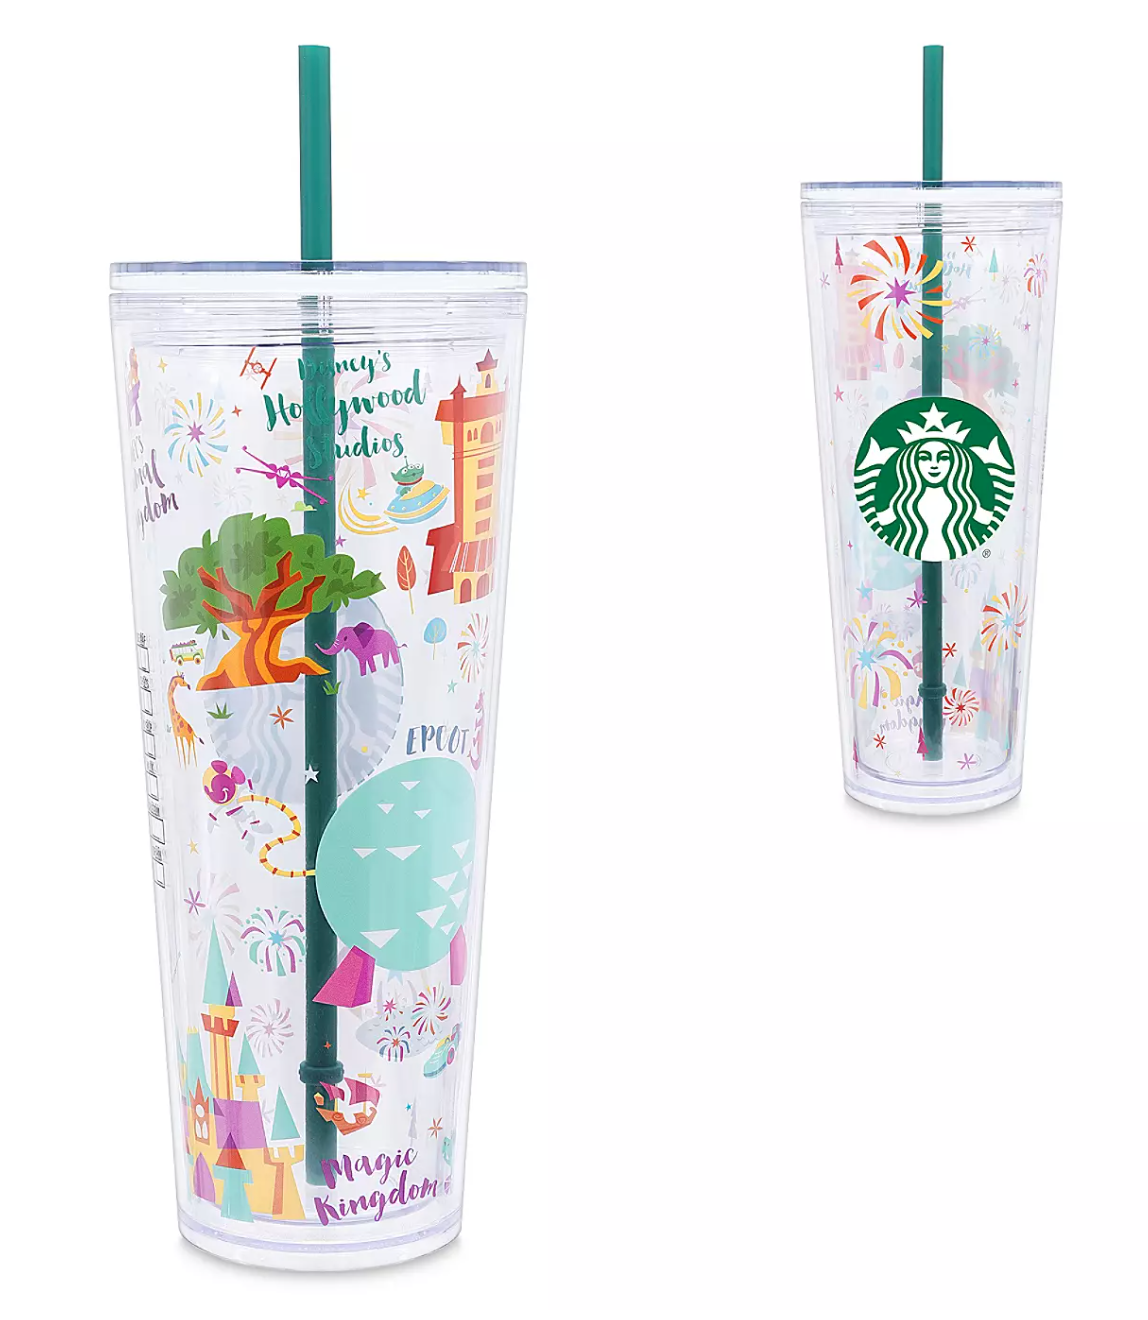 https://www.disneyfoodblog.com/wp-content/uploads/2021/01/Walt-Disney-World-Tumbler-with-Straw-by-Starbucks-%E2%80%93-LargeScreen-Shot-2021-01-18-at-9.16.24-AM-1.png